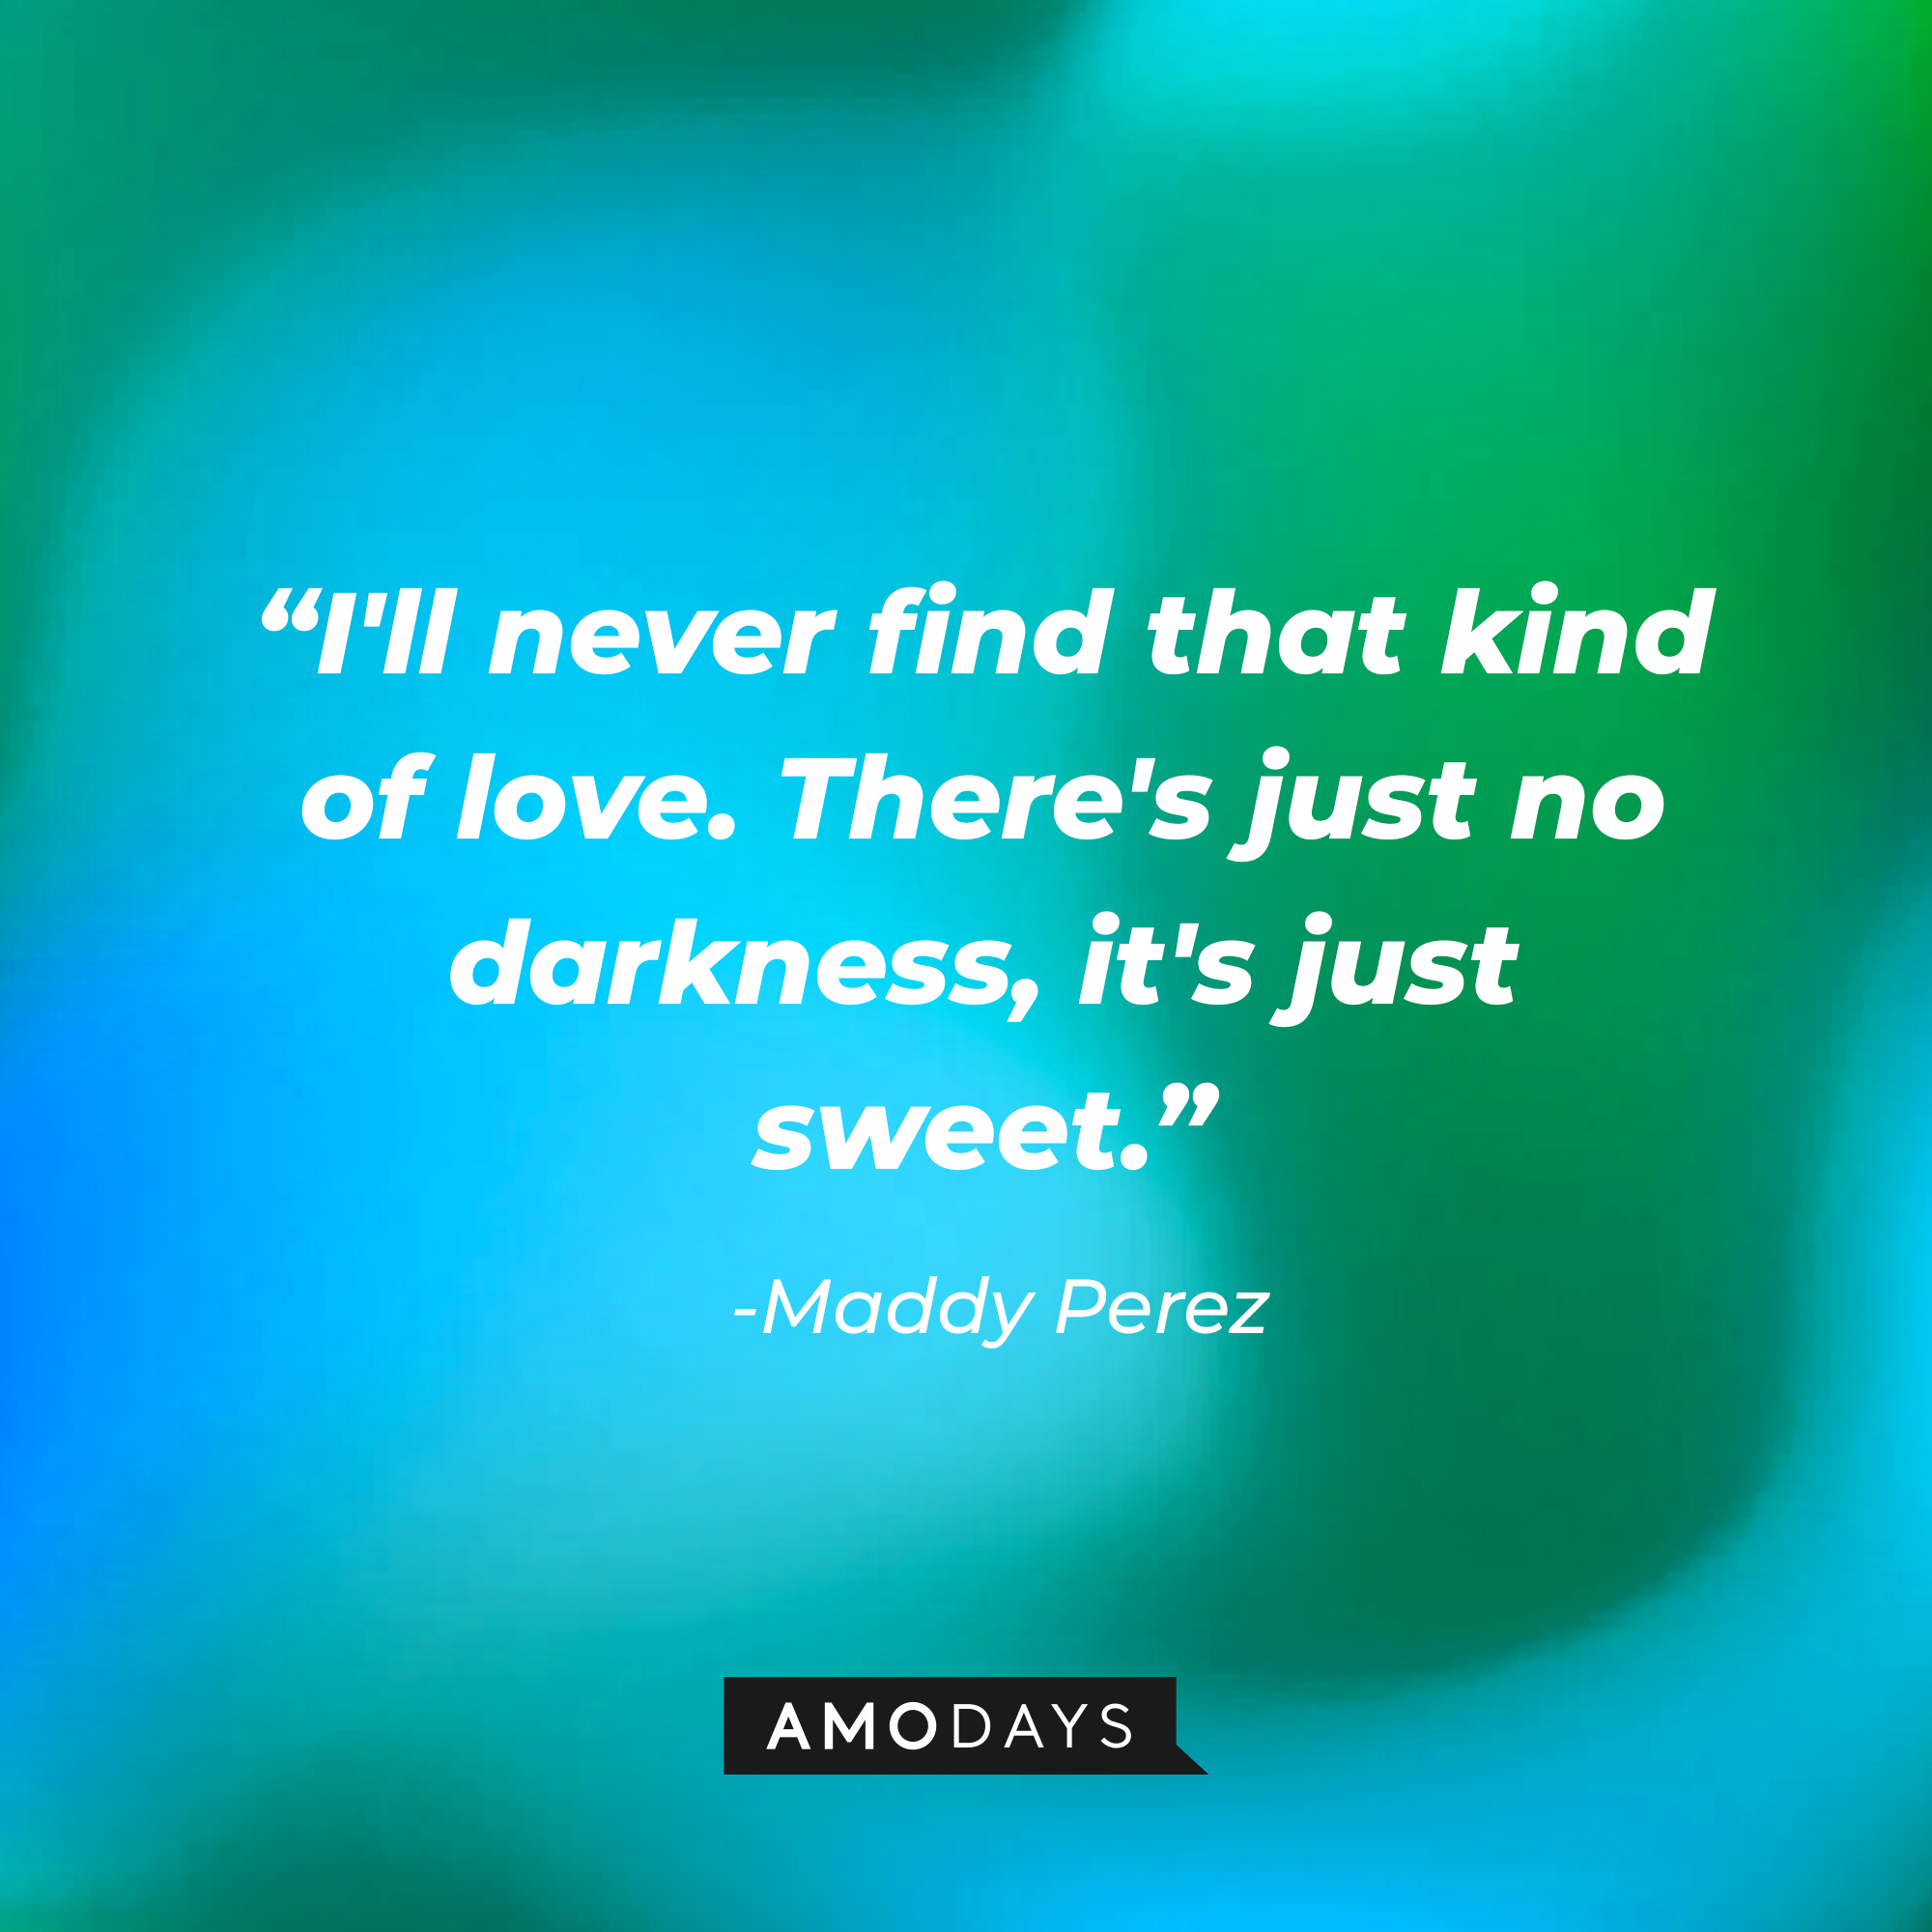 Maddy Perez’ quote: "I'll never find that kind of love. There's just no darkness, it's just sweet. I don't know if that would ever be enough for me." | Source: AmoDays